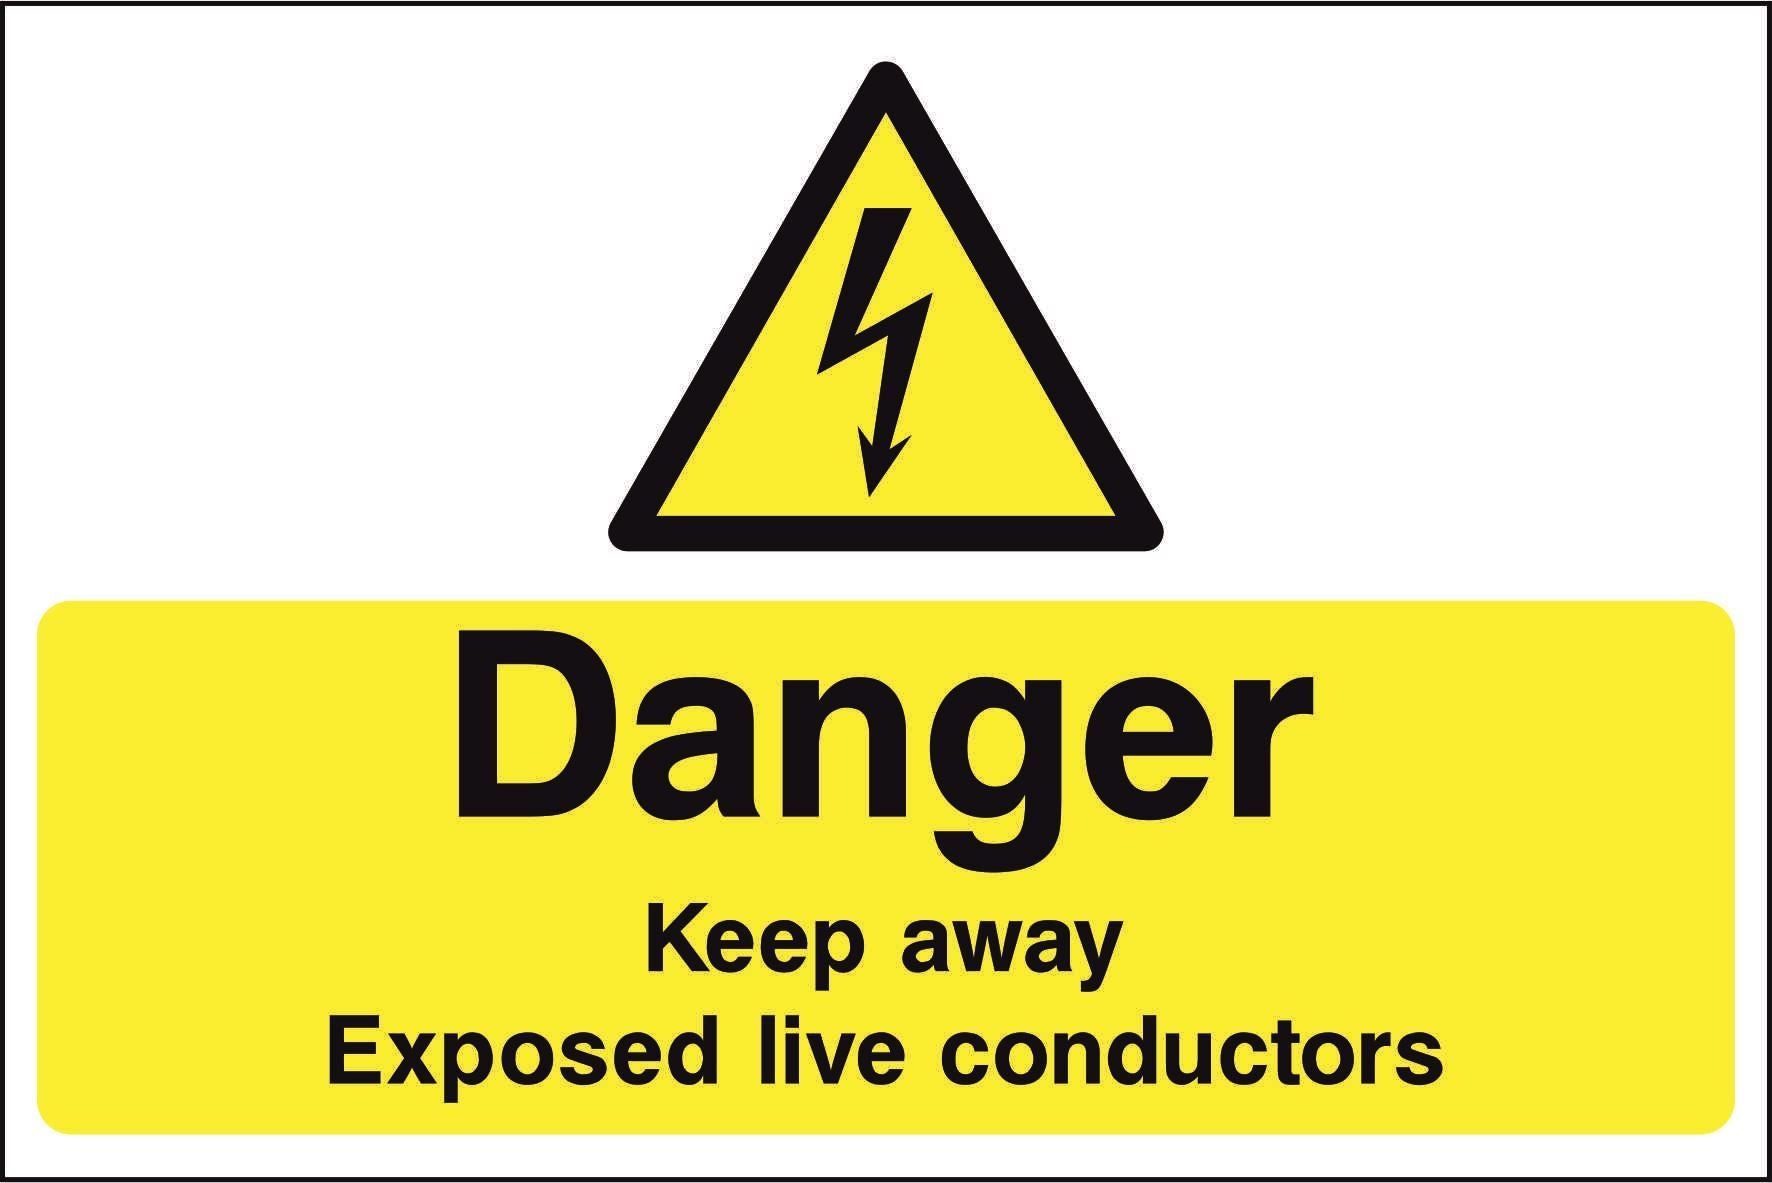 DANGER Keep away Exposed live conductors